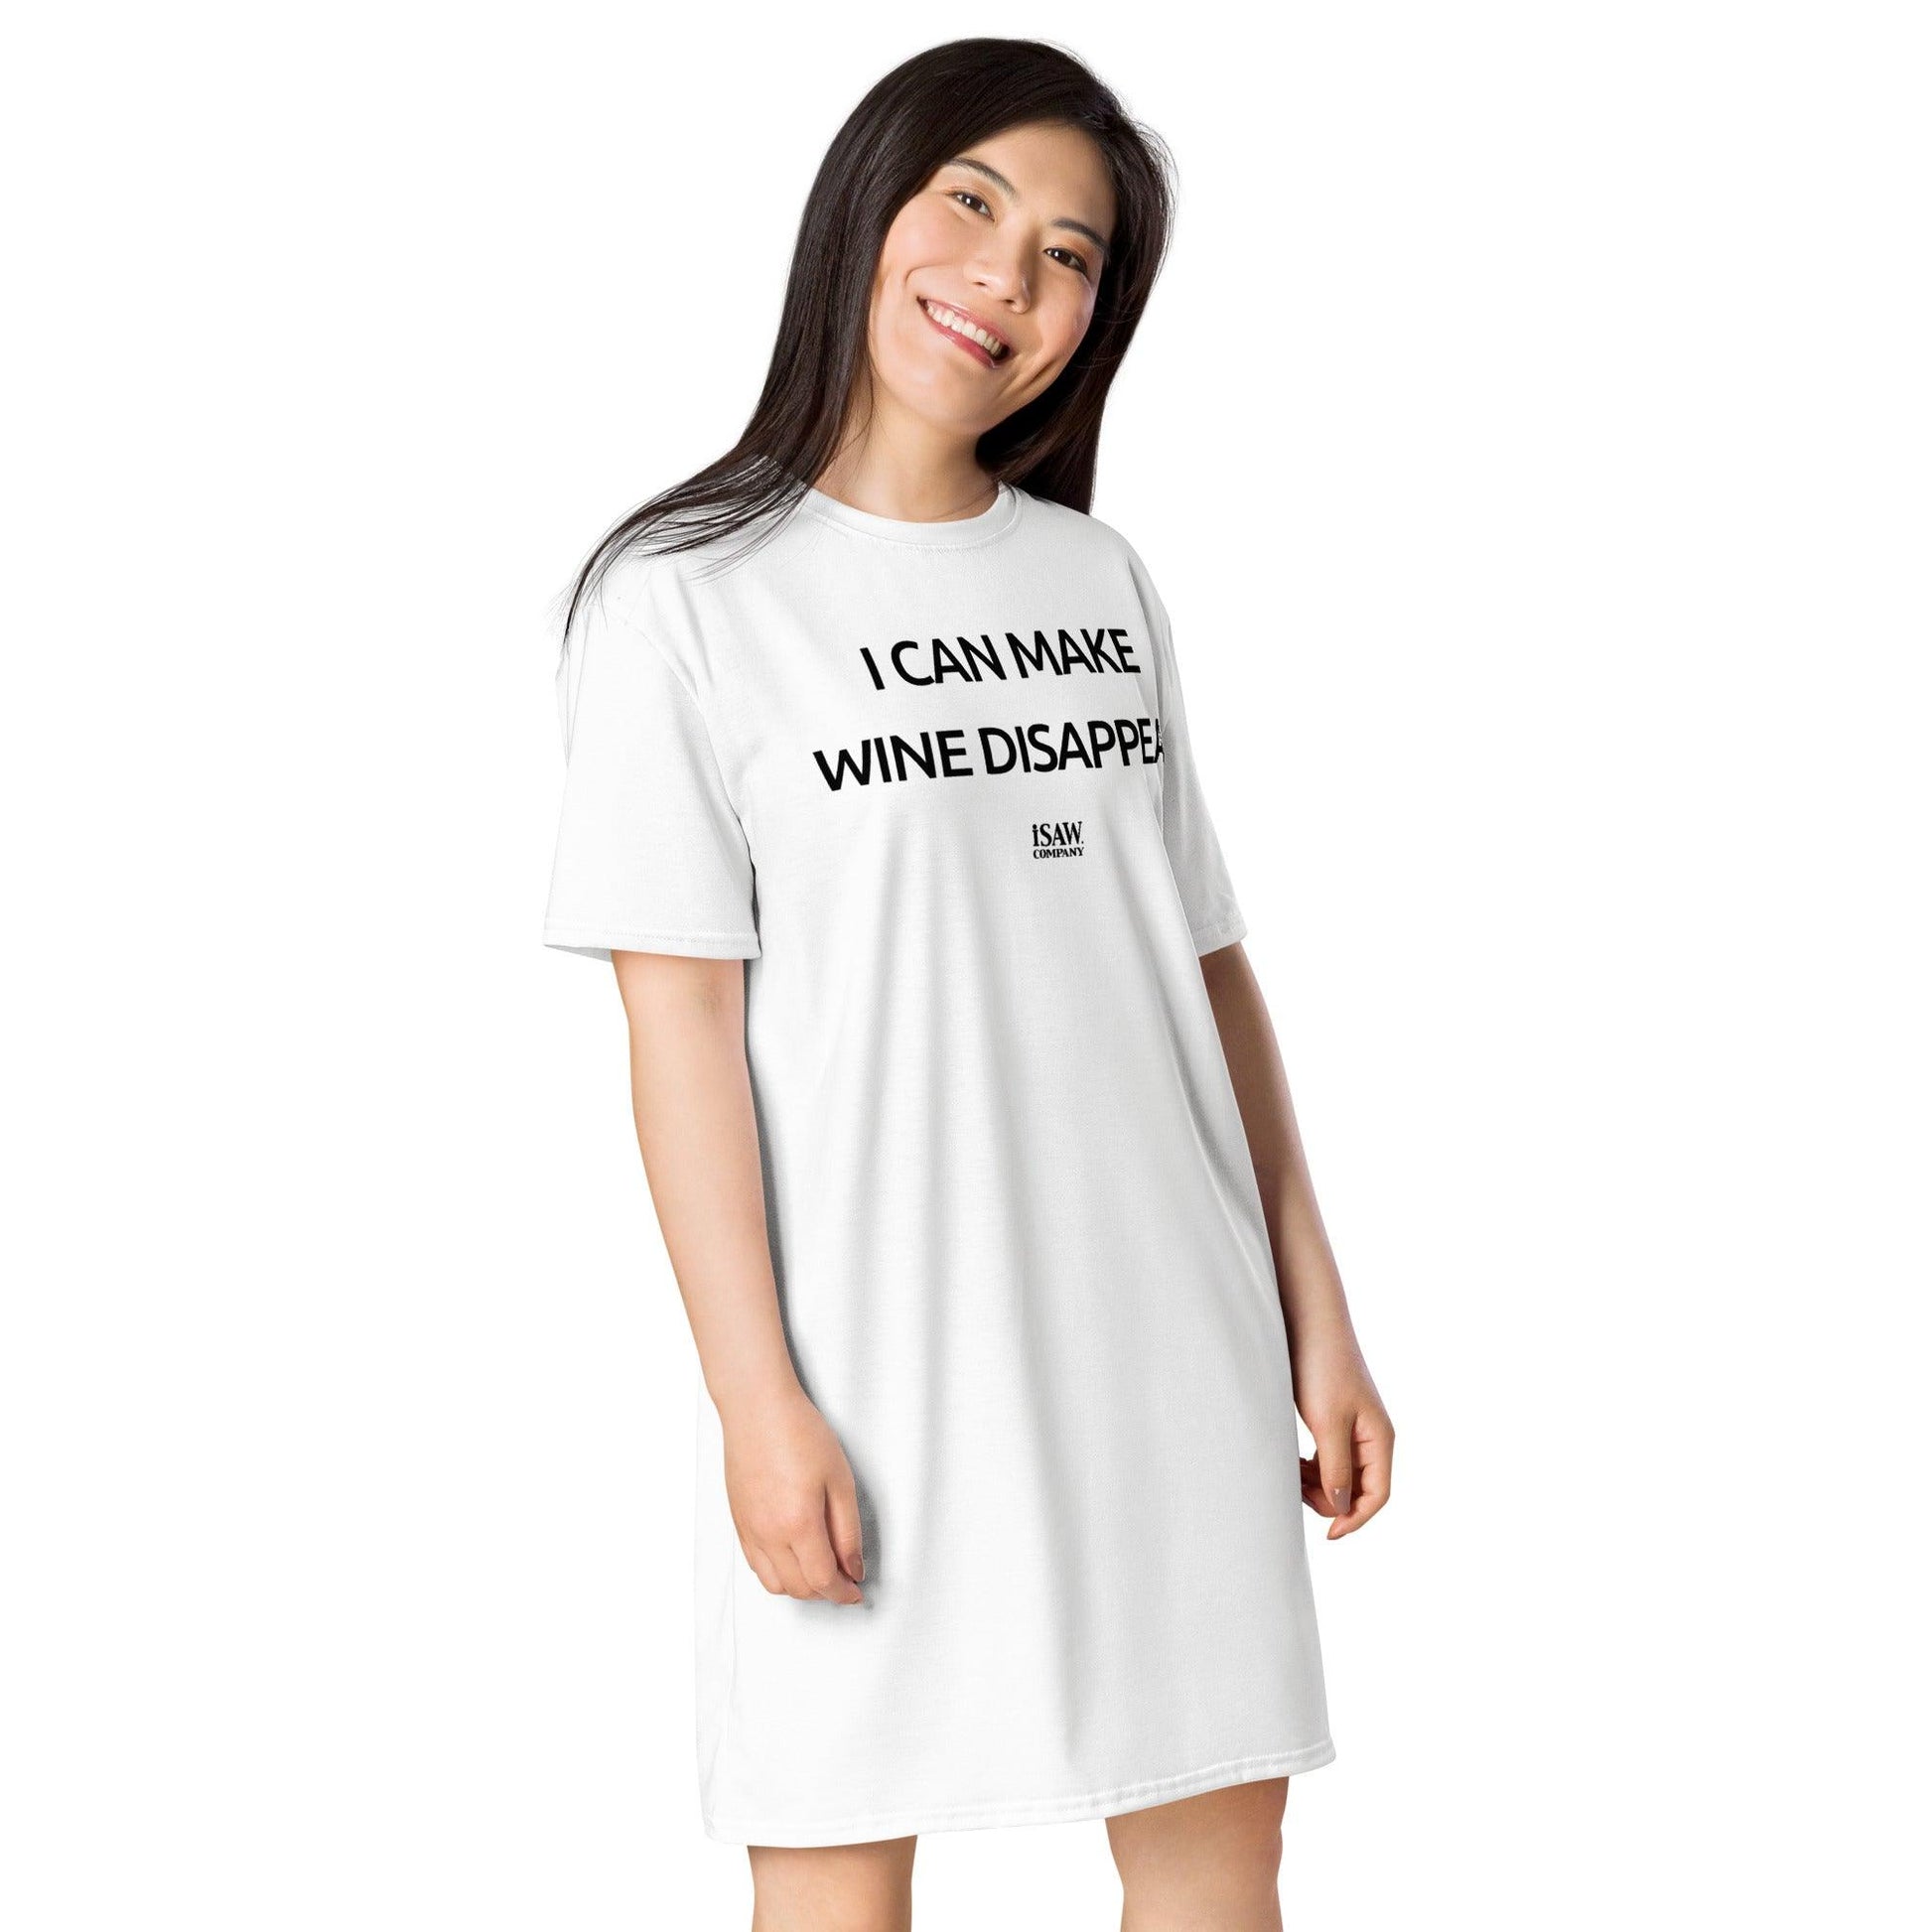 I Can Make Wine Disappear - Womens White T-Shirt Dress - iSAW Company